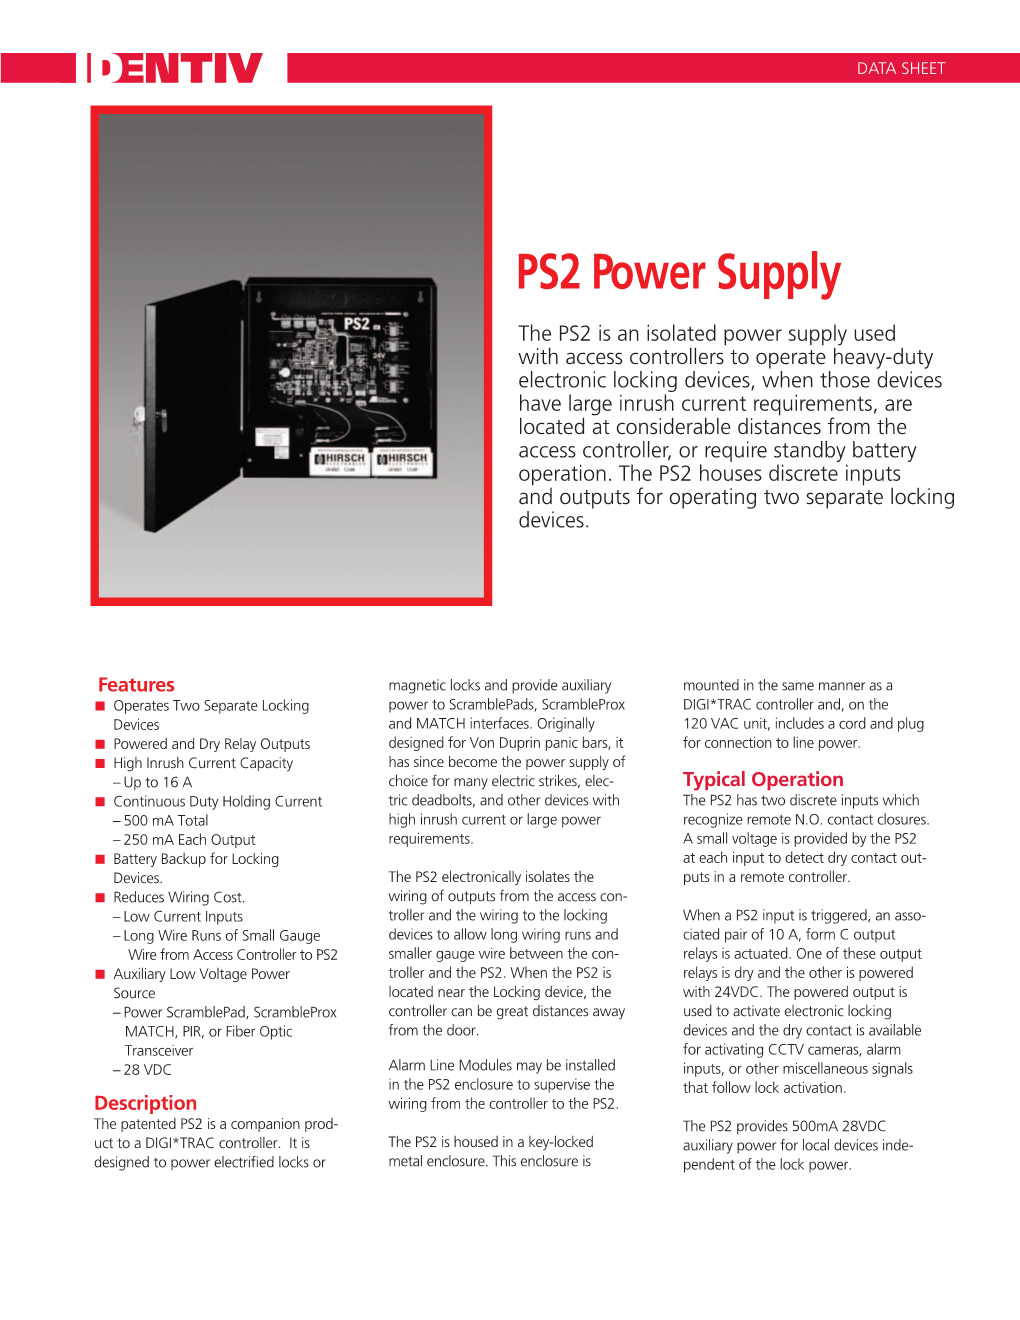 PS2 Power Supply